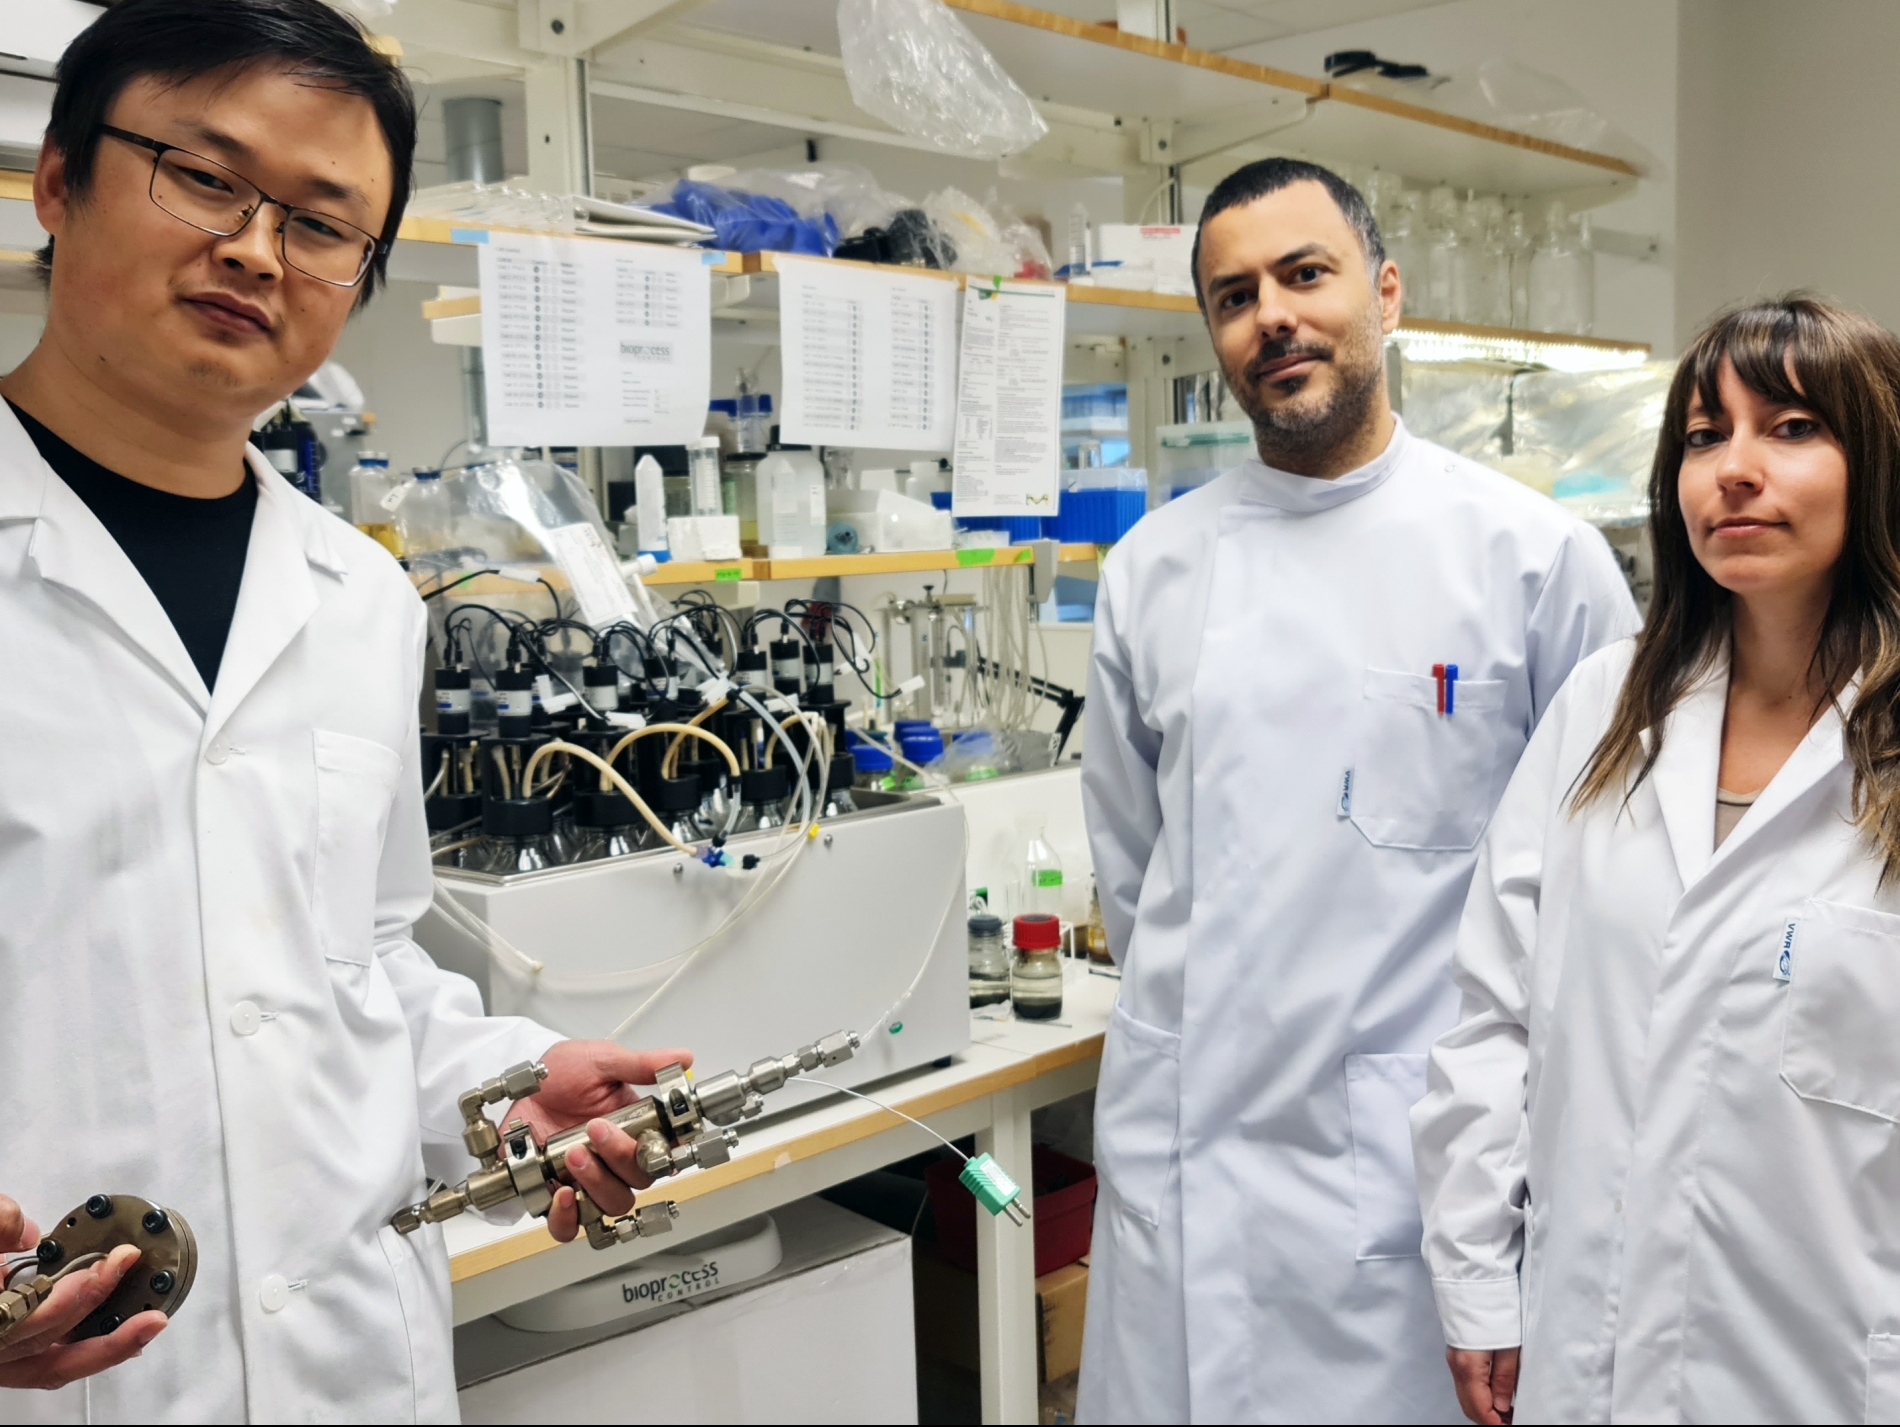 Liang Yu, Leonidas Matsakas and Io Antonopoulou in a research laboratory at Luleå University of Technology. Photo by courtesy of Liang Yu.